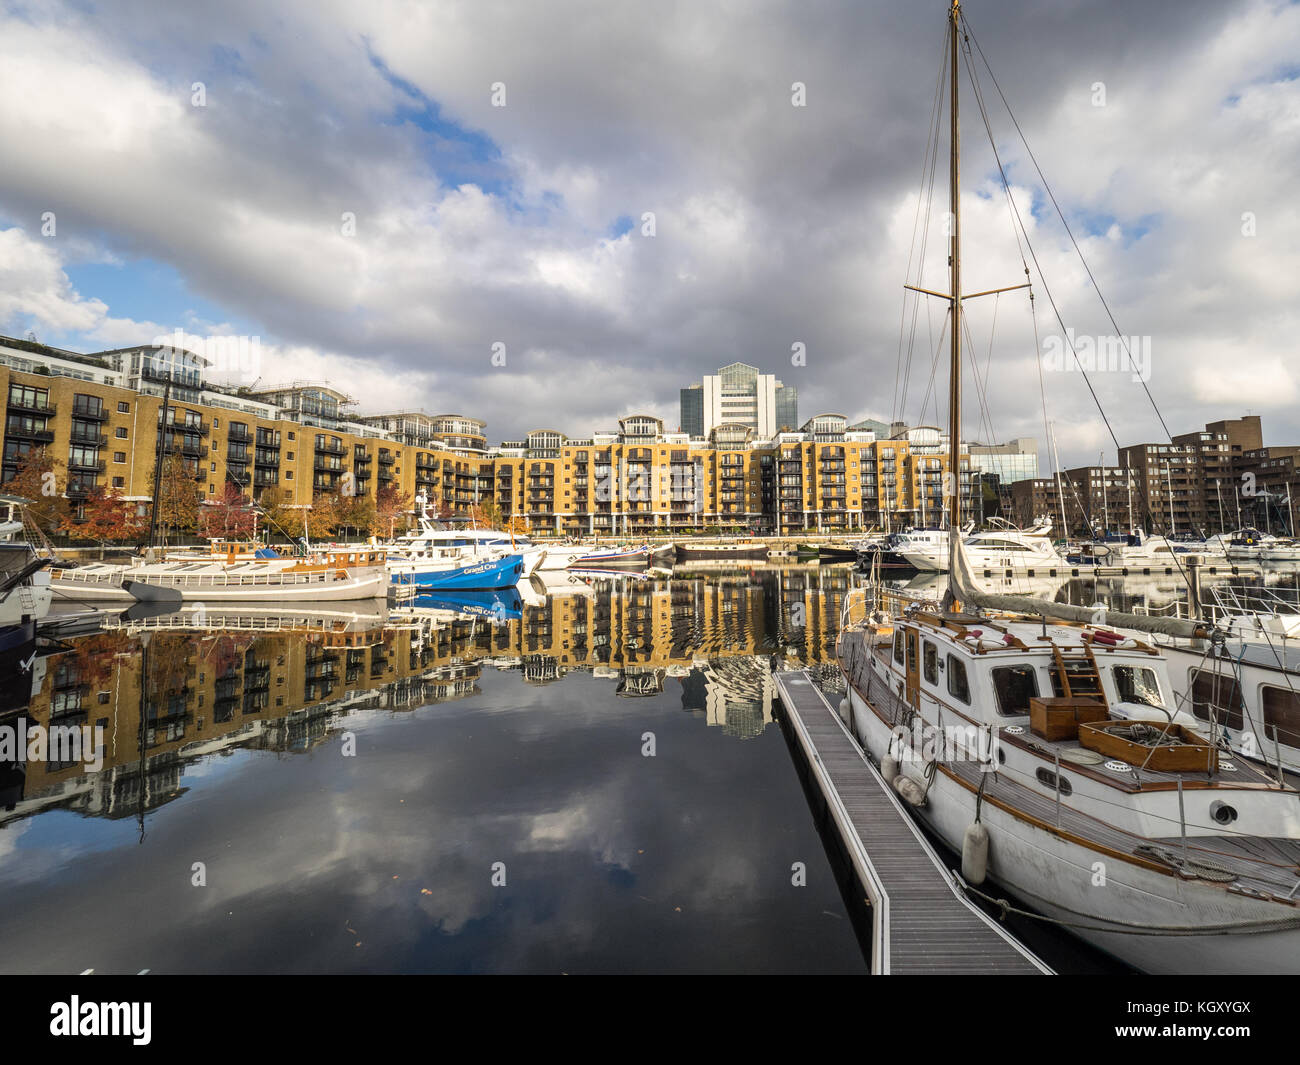 St Katharine Docks in central London - originally opened in 1828 the docks are now redeveloped for office, residential and boating use. Stock Photo